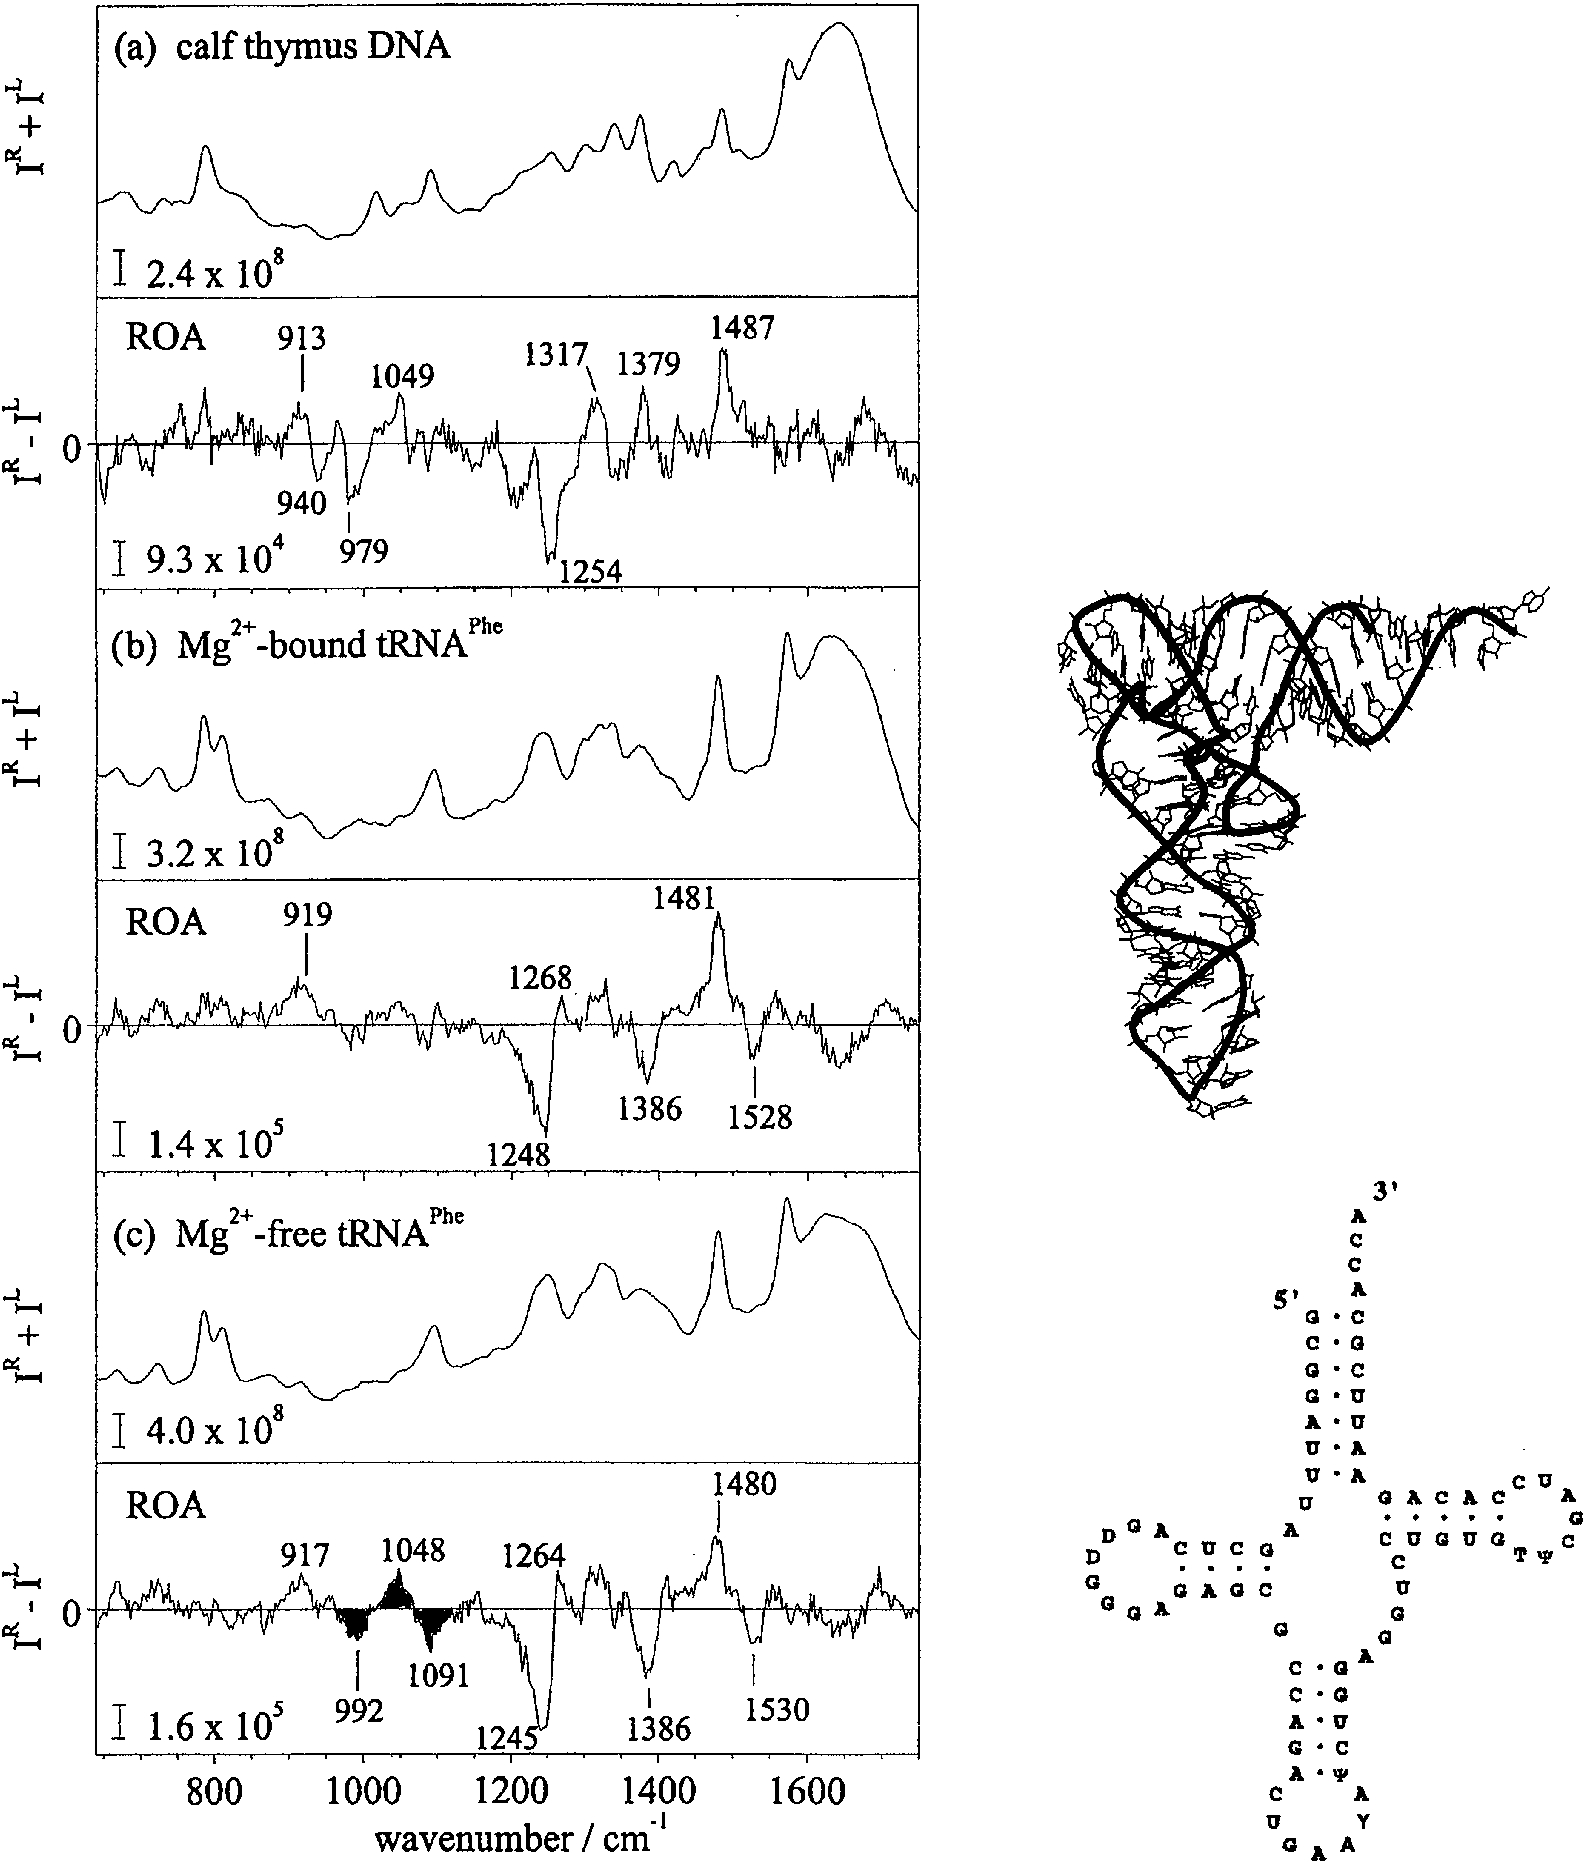 Backscattered ICP Raman and ROA spectra of (a) calf thymus DNA, (b) Mg2+-bound tRNAPhe and its associated L-shaped tertiary fold and (c) Mg2+-free tRNAPhe and its associated open cloverleaf secondary structure, in aqueous solution. Adapted from [28].